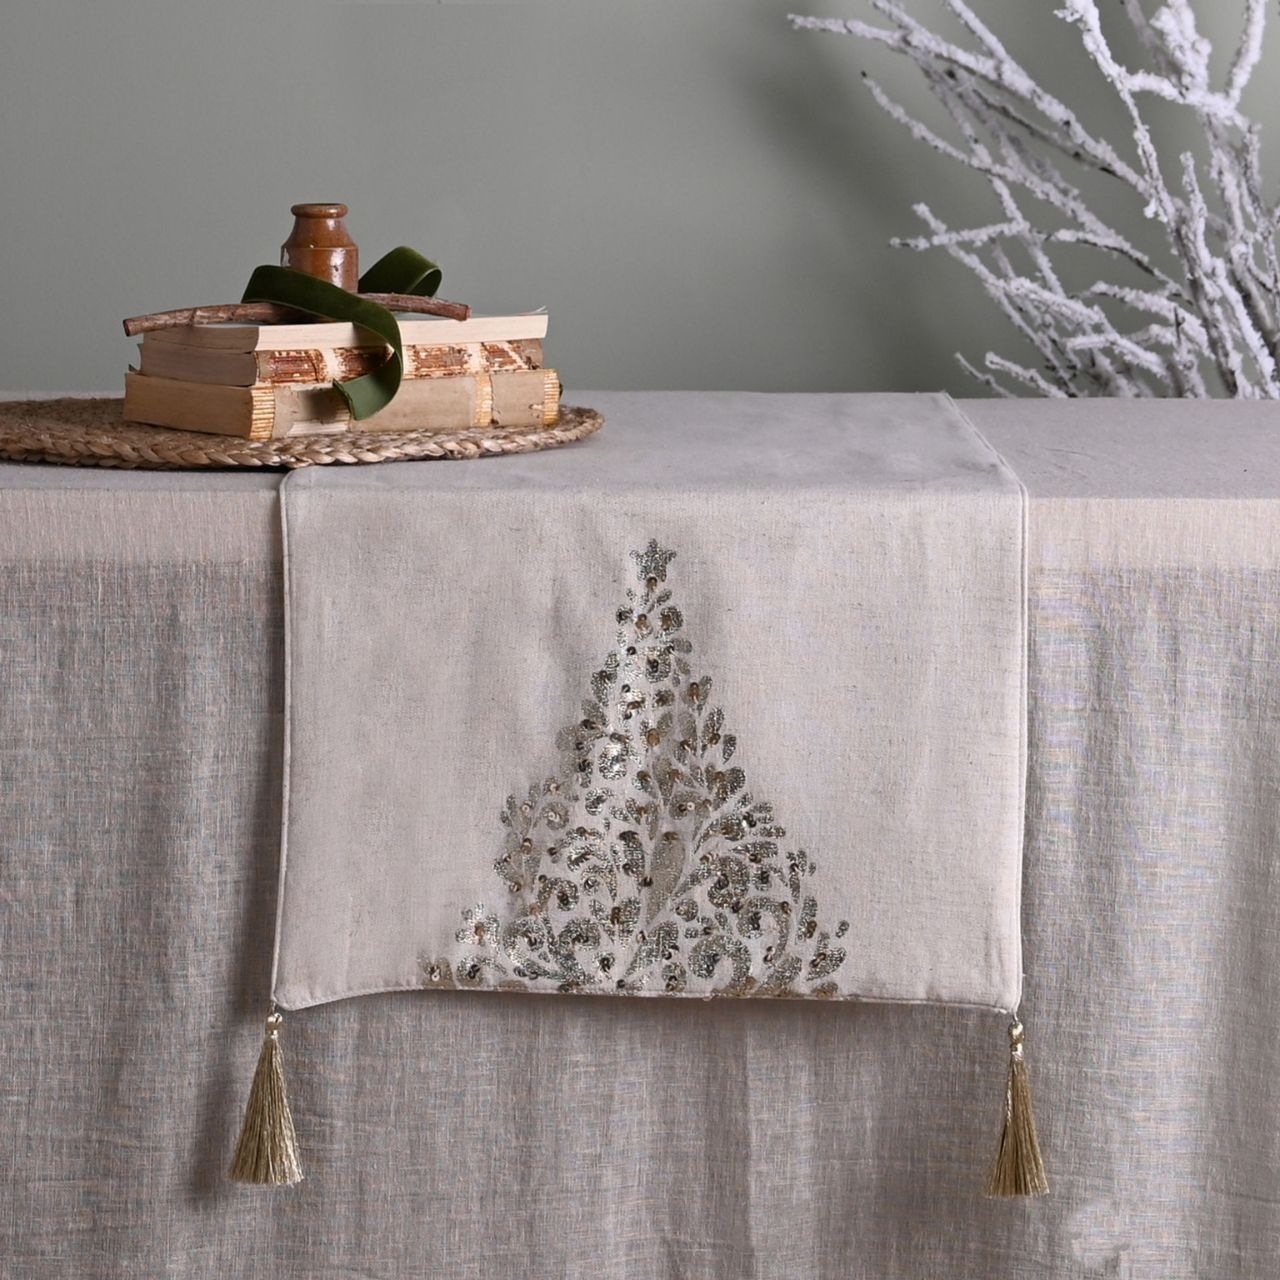 Natural Table Runner with Gold Christmas Tree Design  A natural table runner with gold Christmas tree.  This delightful table runner will enhance dining tables throughout the festive period.